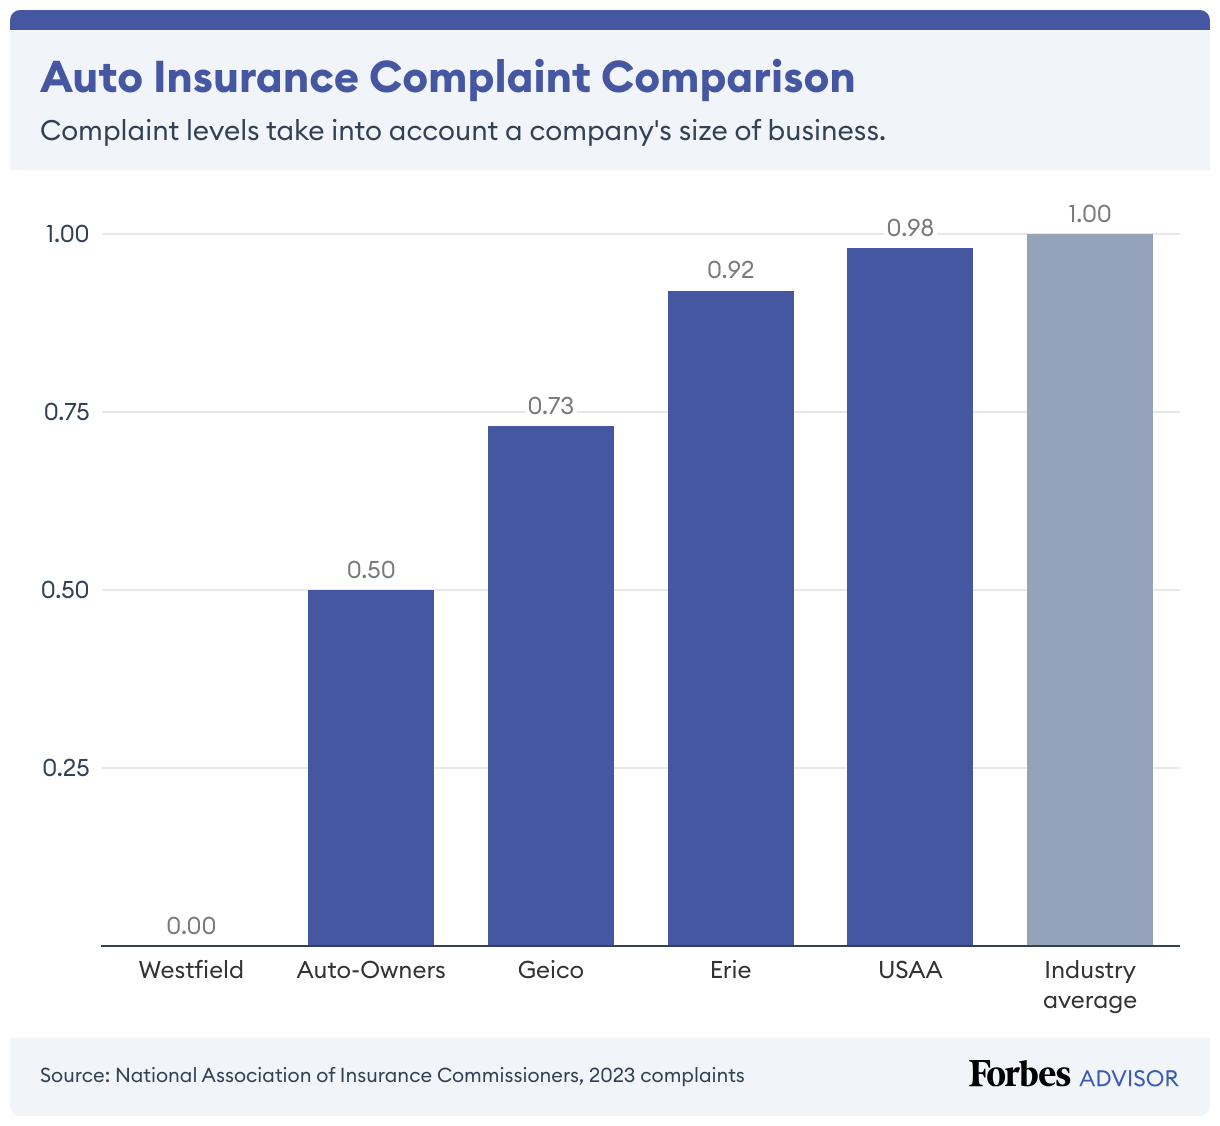 Westfield and Auto Owners have very low levels of complaints while Erie and USAA are just below the industry average.